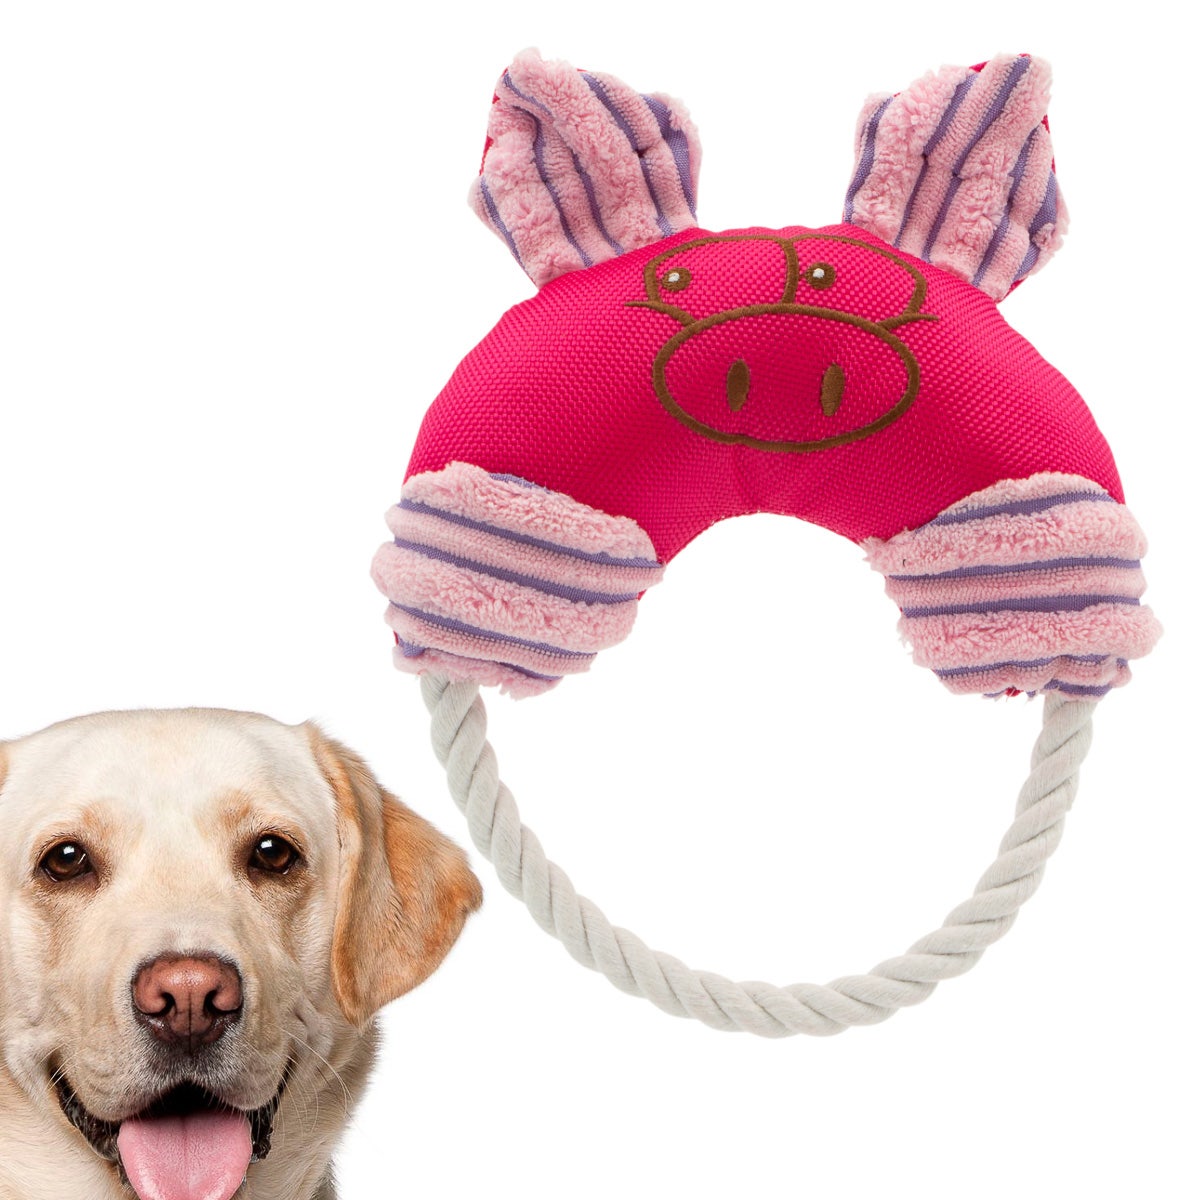 Rope & Canvas Animal Dog Toy With Squeaker – Toss, Tug & Chew!